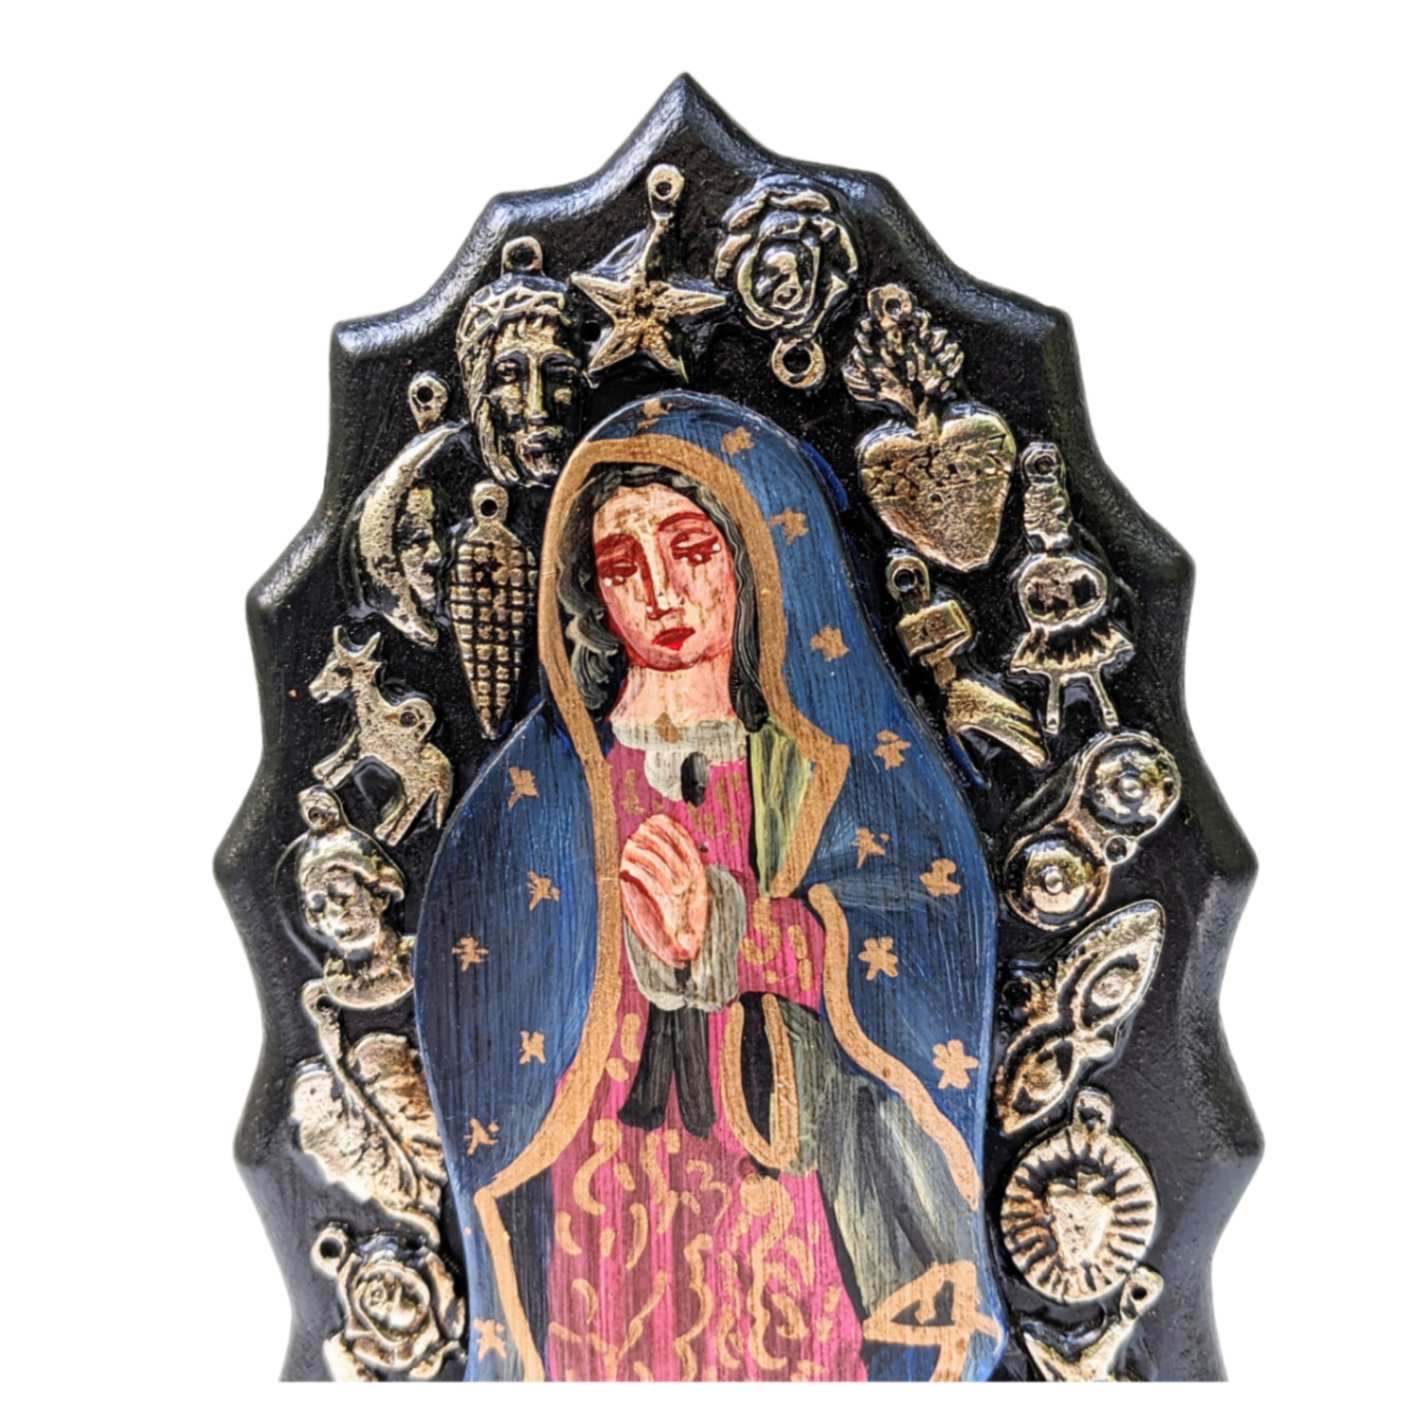 Guadalupe Surrounded by Milagros (Miracles)